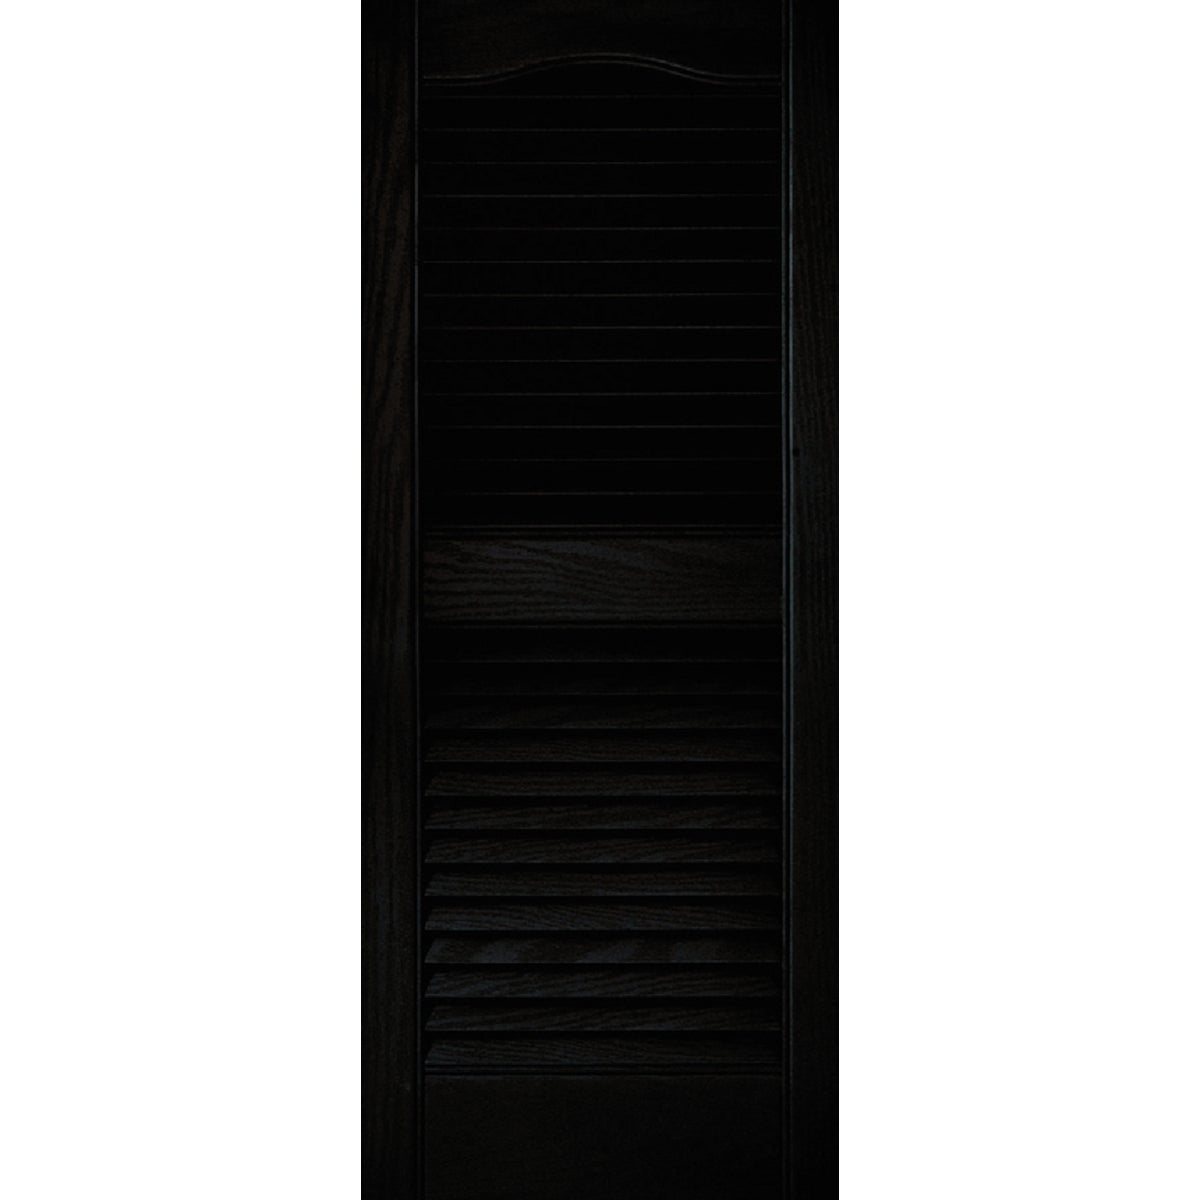 Item 160709, All shutters open louvered cathedral top with center rail and 15" wide.